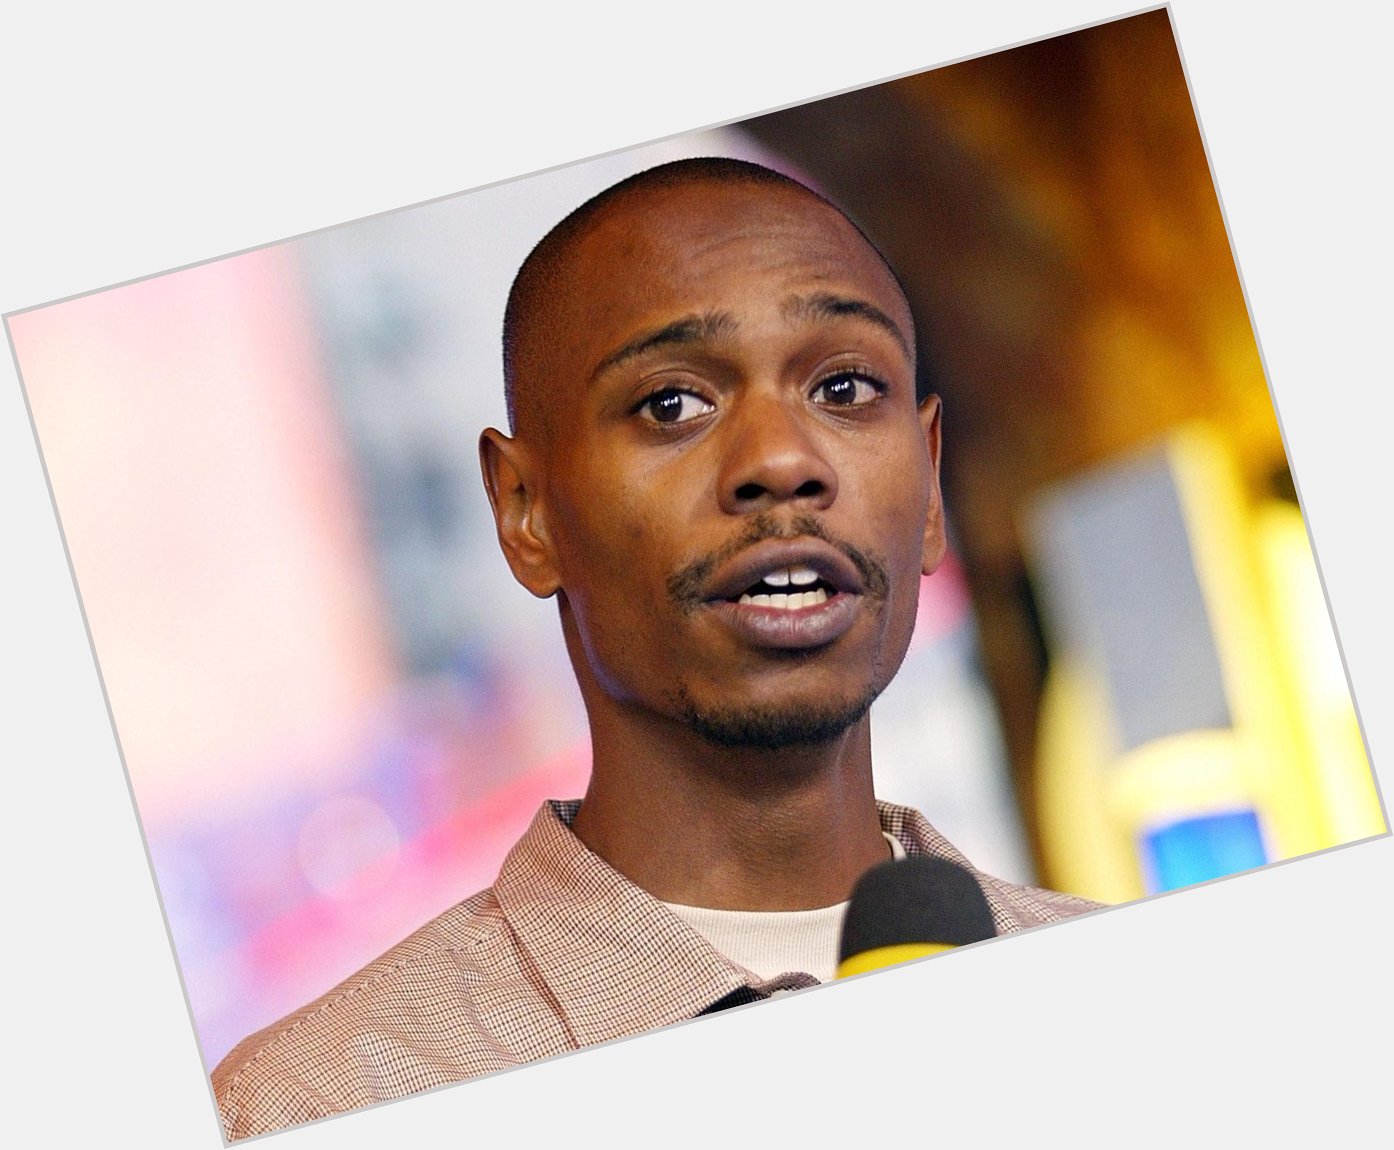 Big Happy Birthday shoutout to one of my favorite people in the whole world...

DAVE CHAPPELLE 